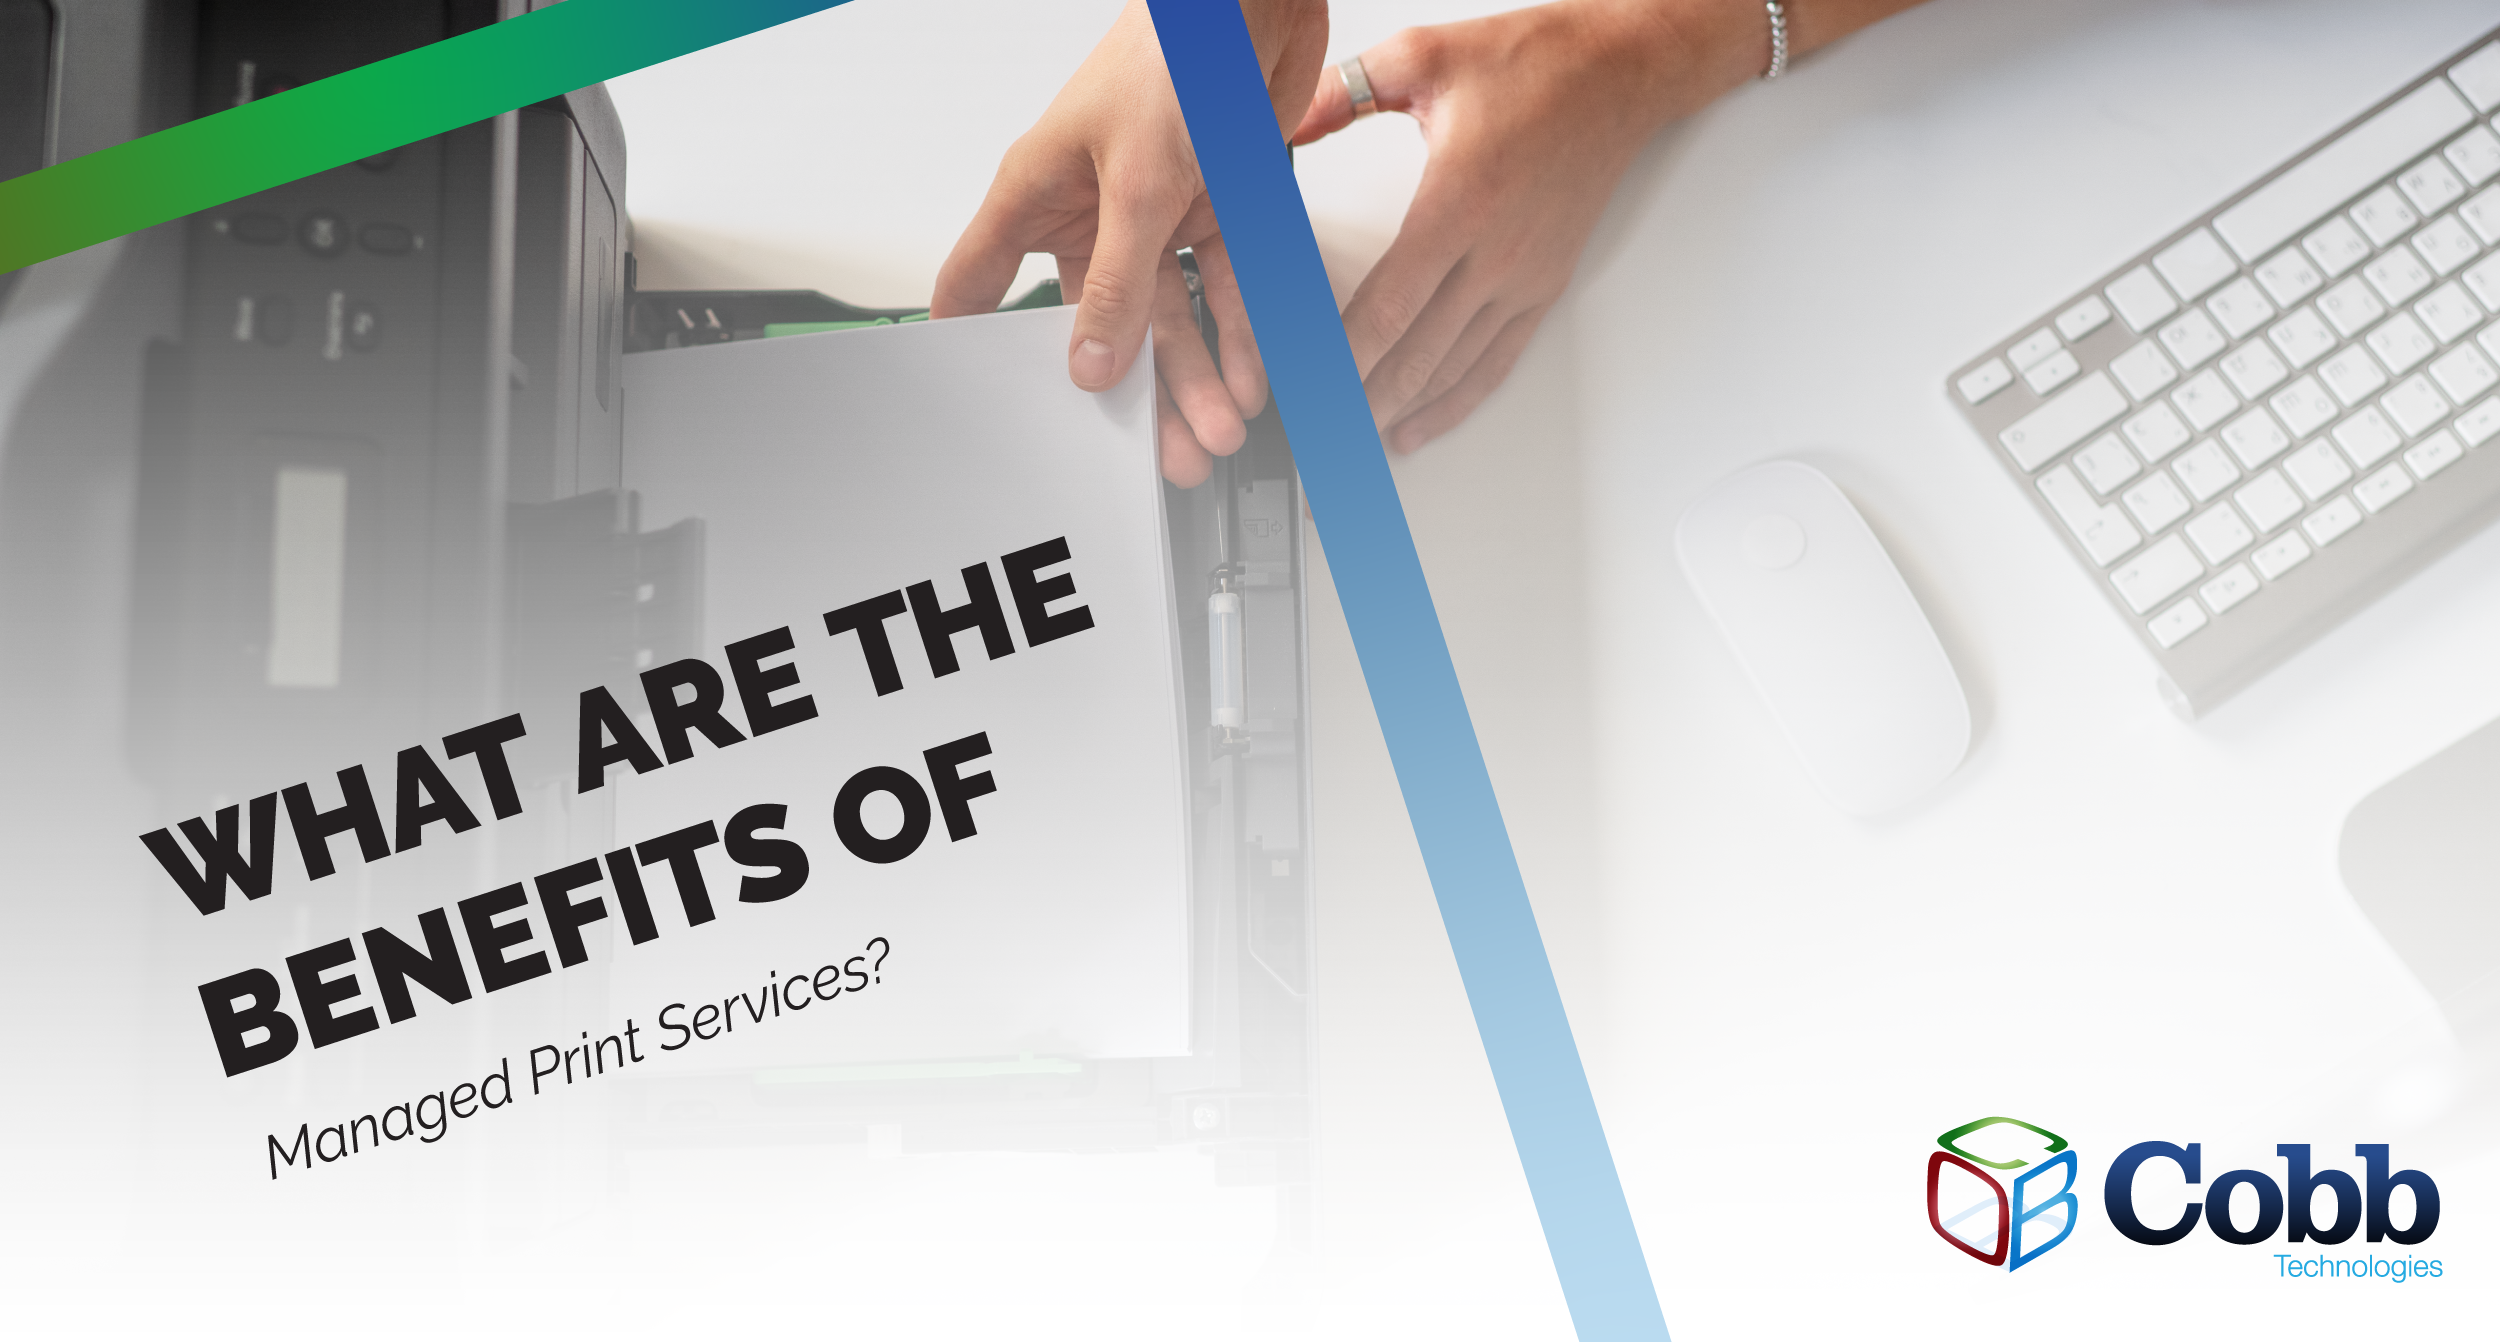 What Are the Benefits of Managed Print Services?